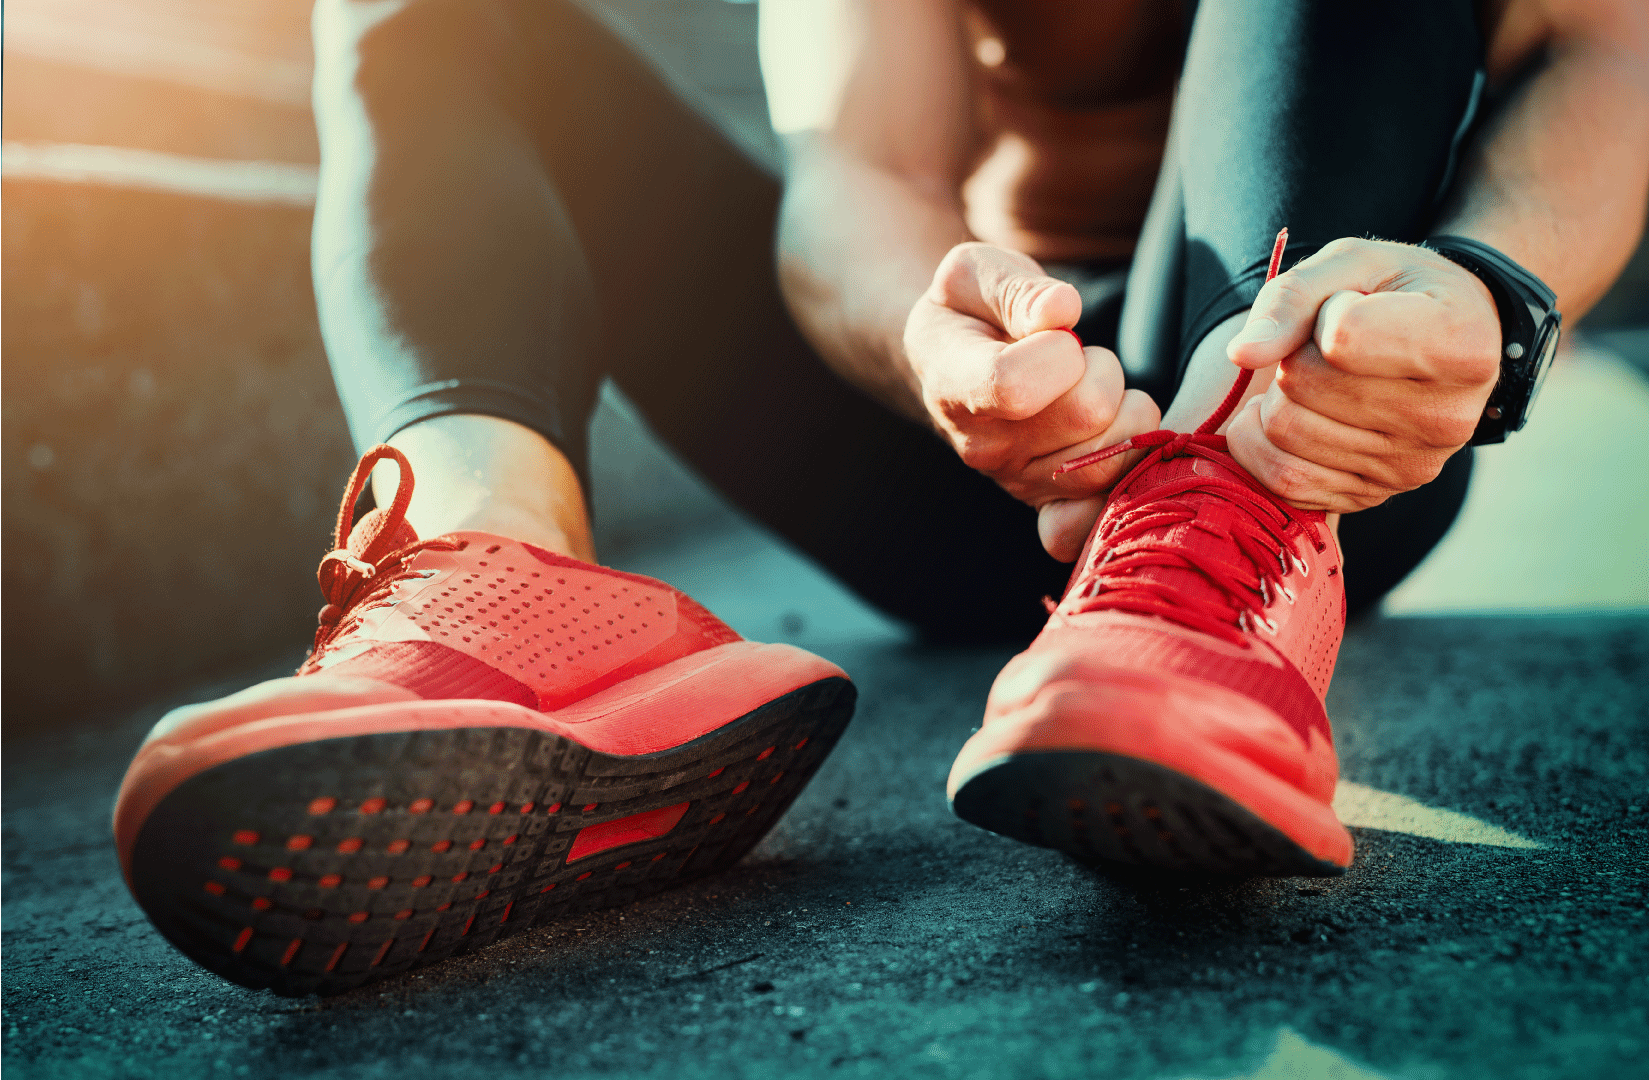 Choosing the Right Running Shoes